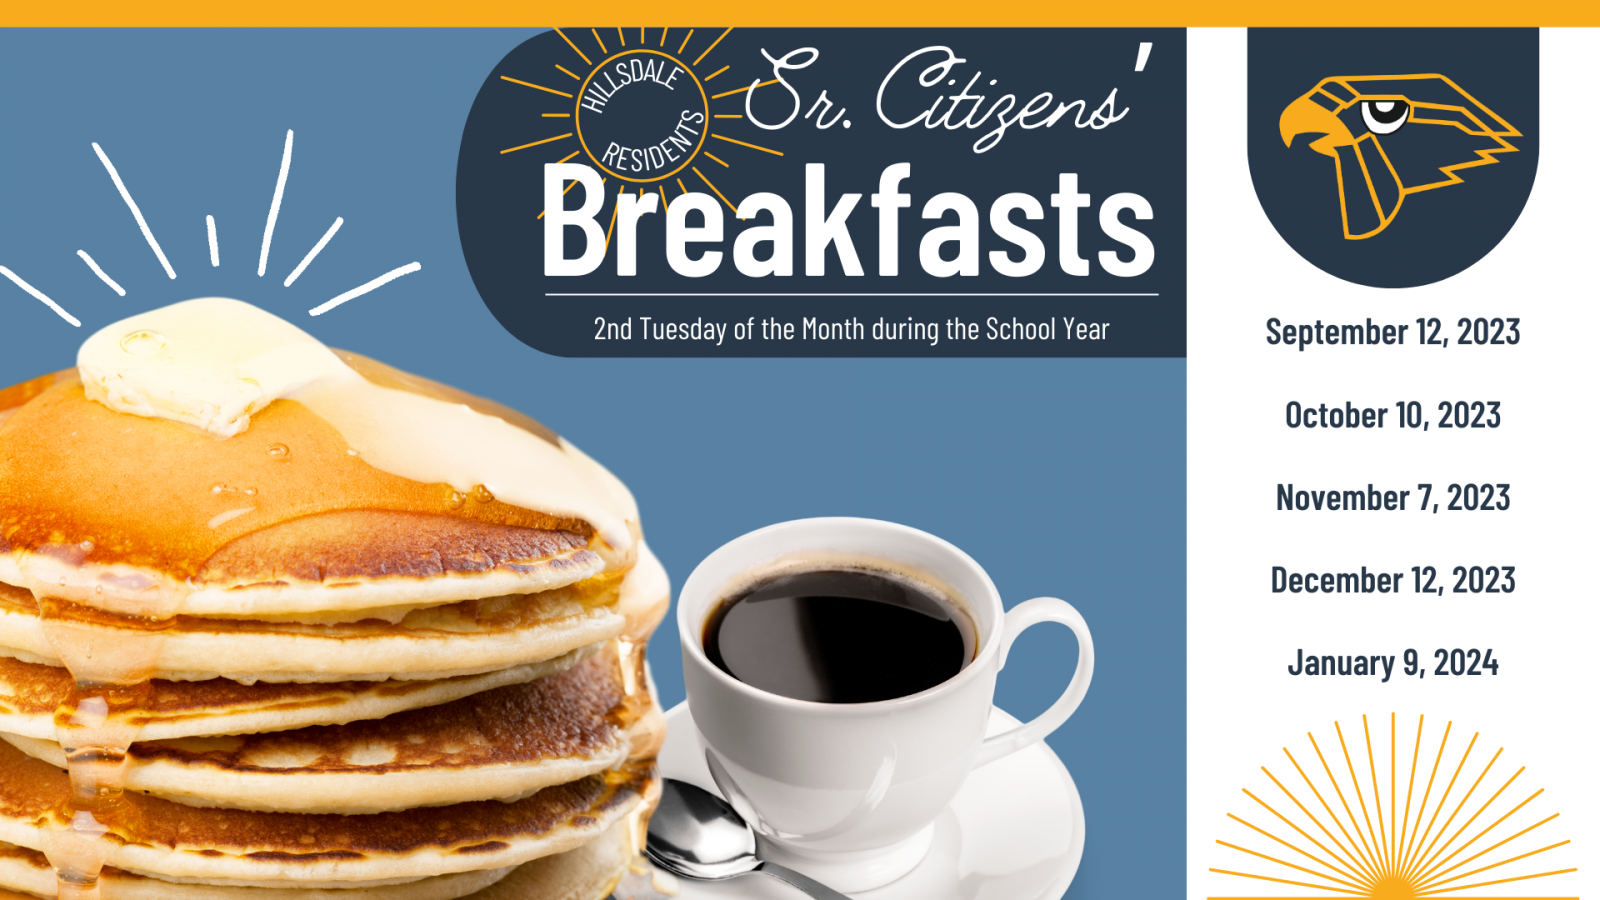 A graphic for the Senior Citizens' Breakfasts.